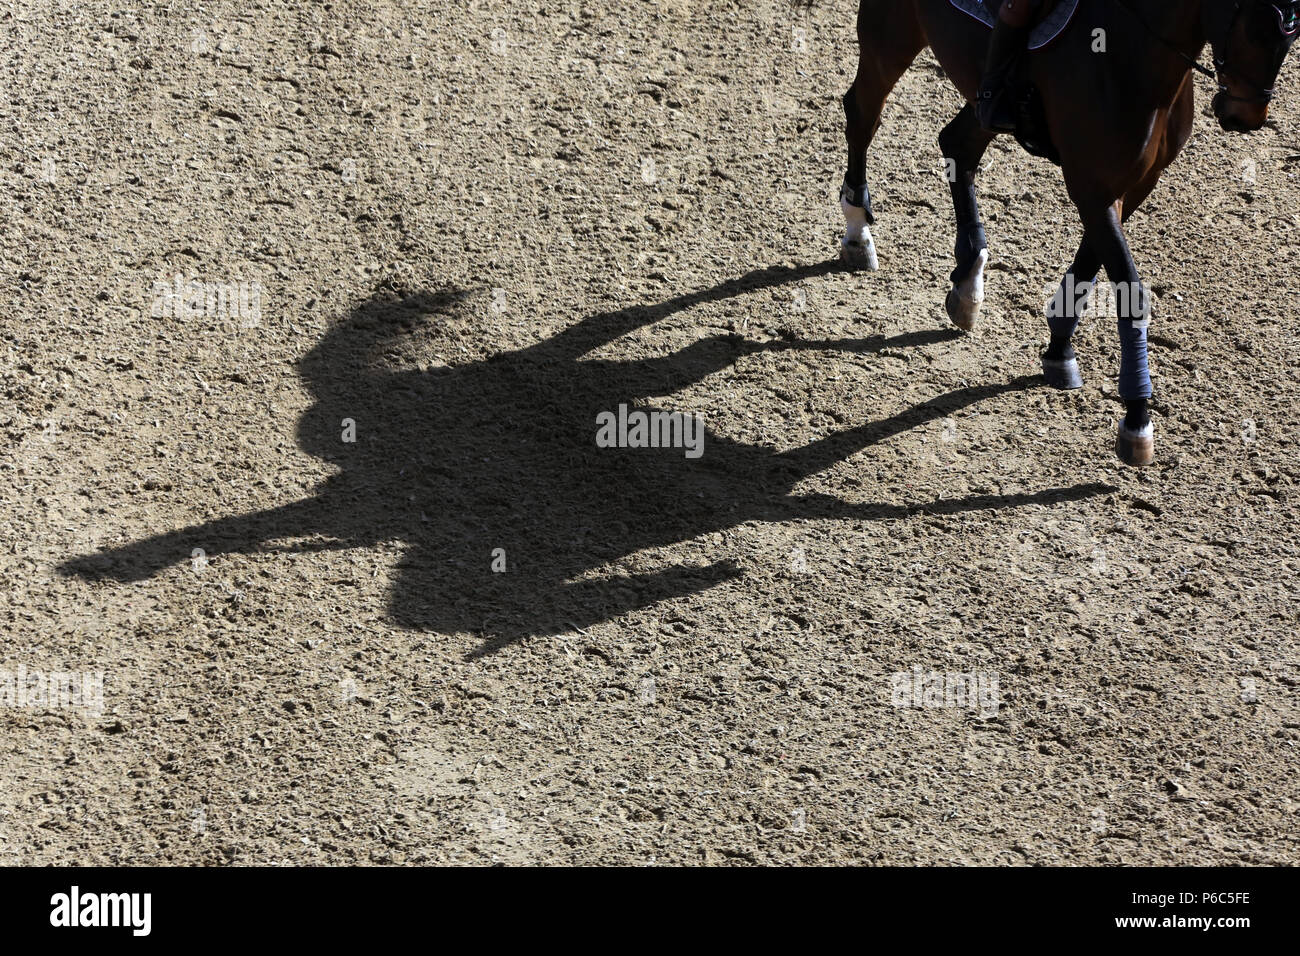 Doha, horse and rider cast a shadow on the ground Stock Photo